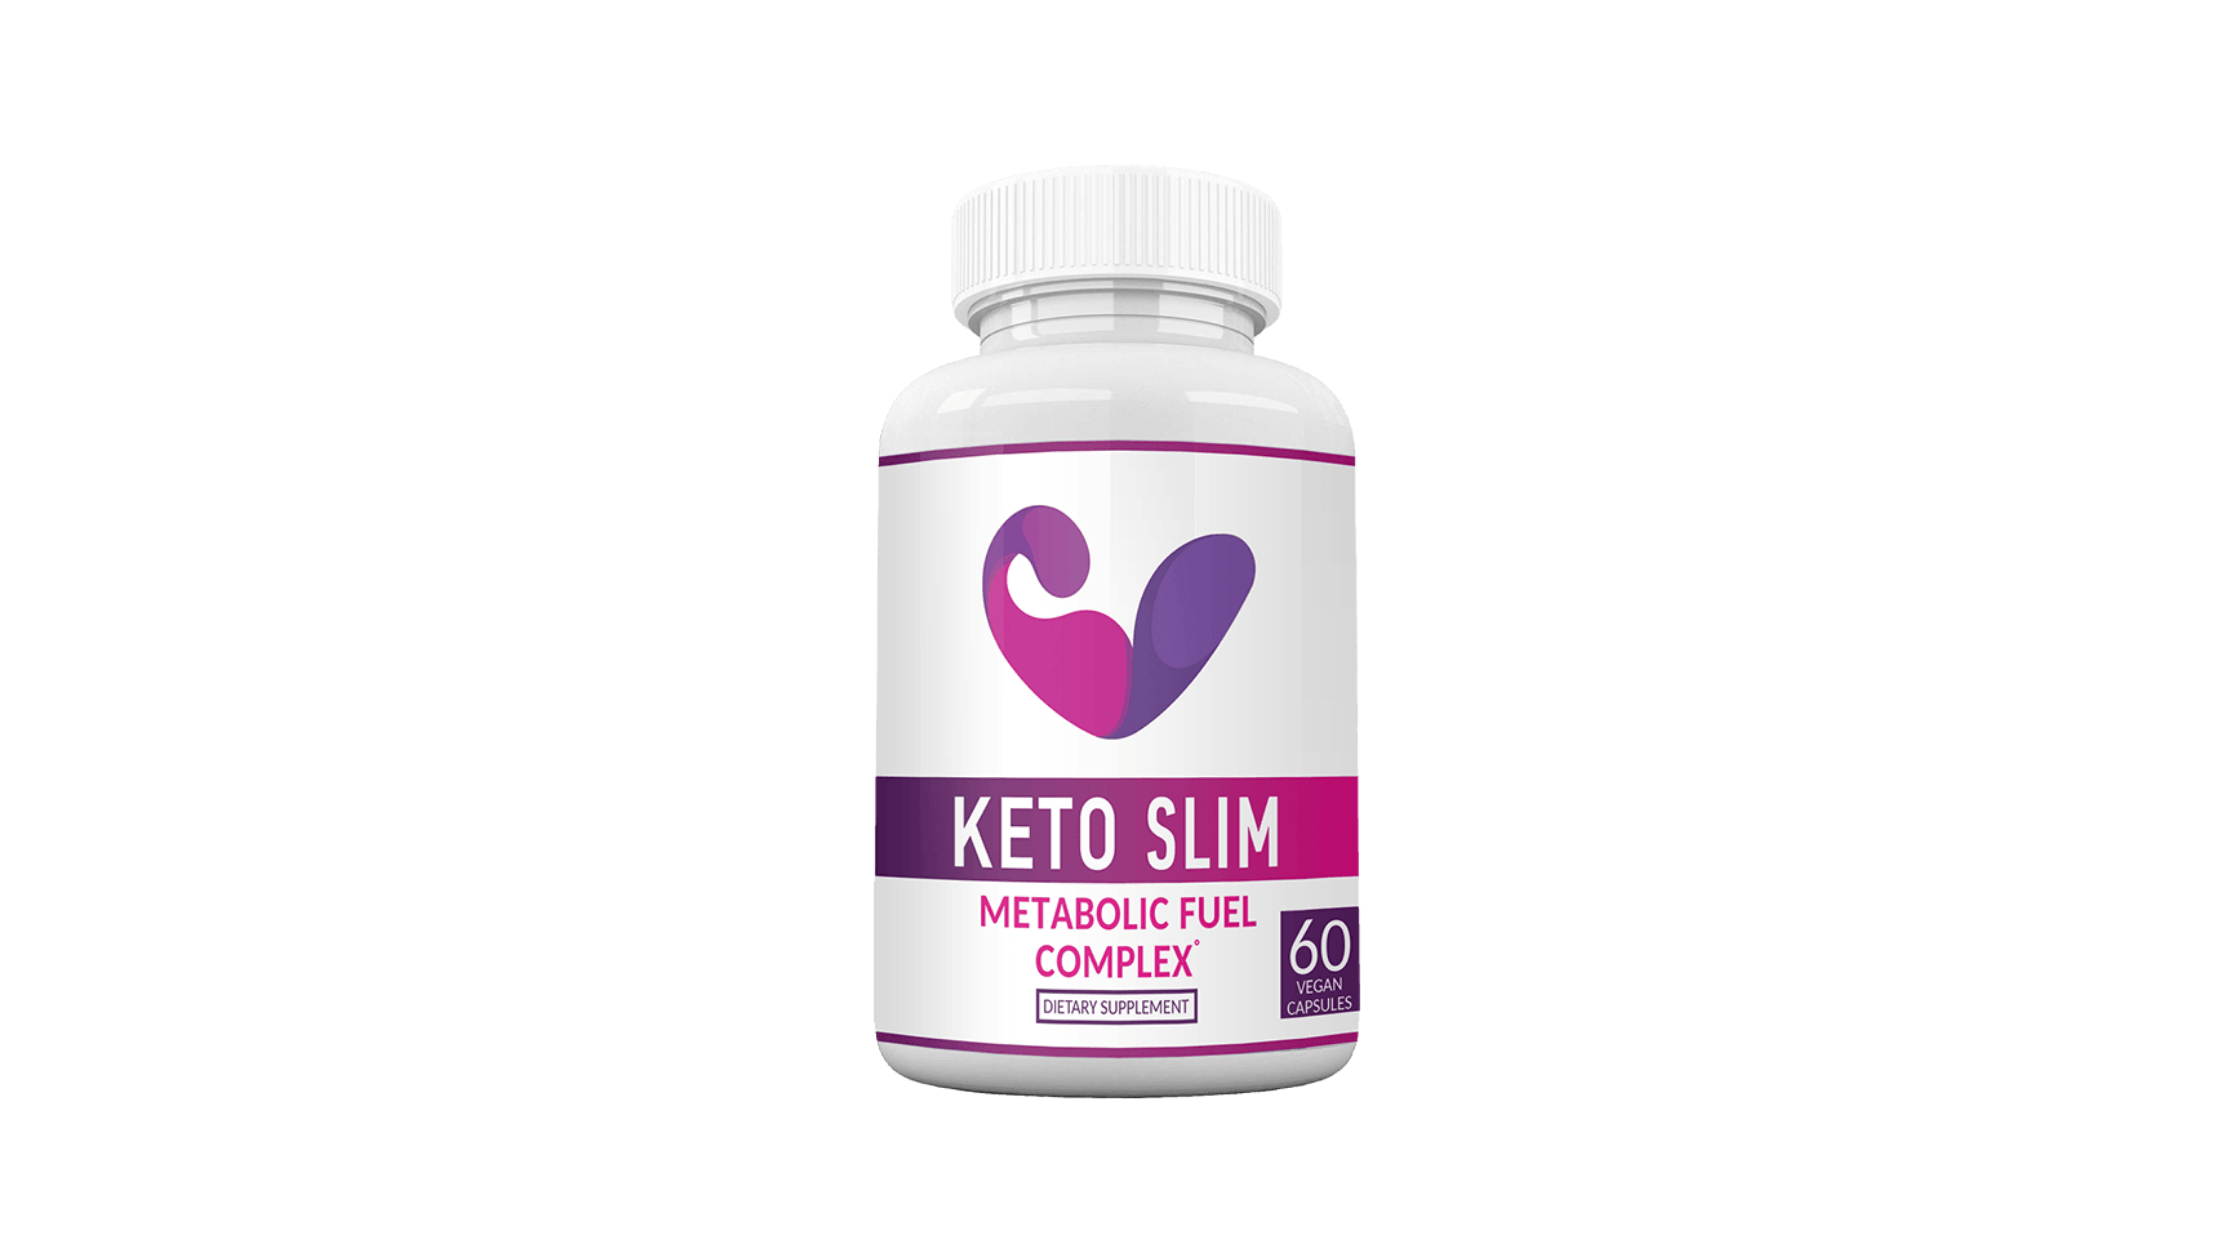 Now Keto Slim Reviews - Are The Ingredients Safe To Consume?